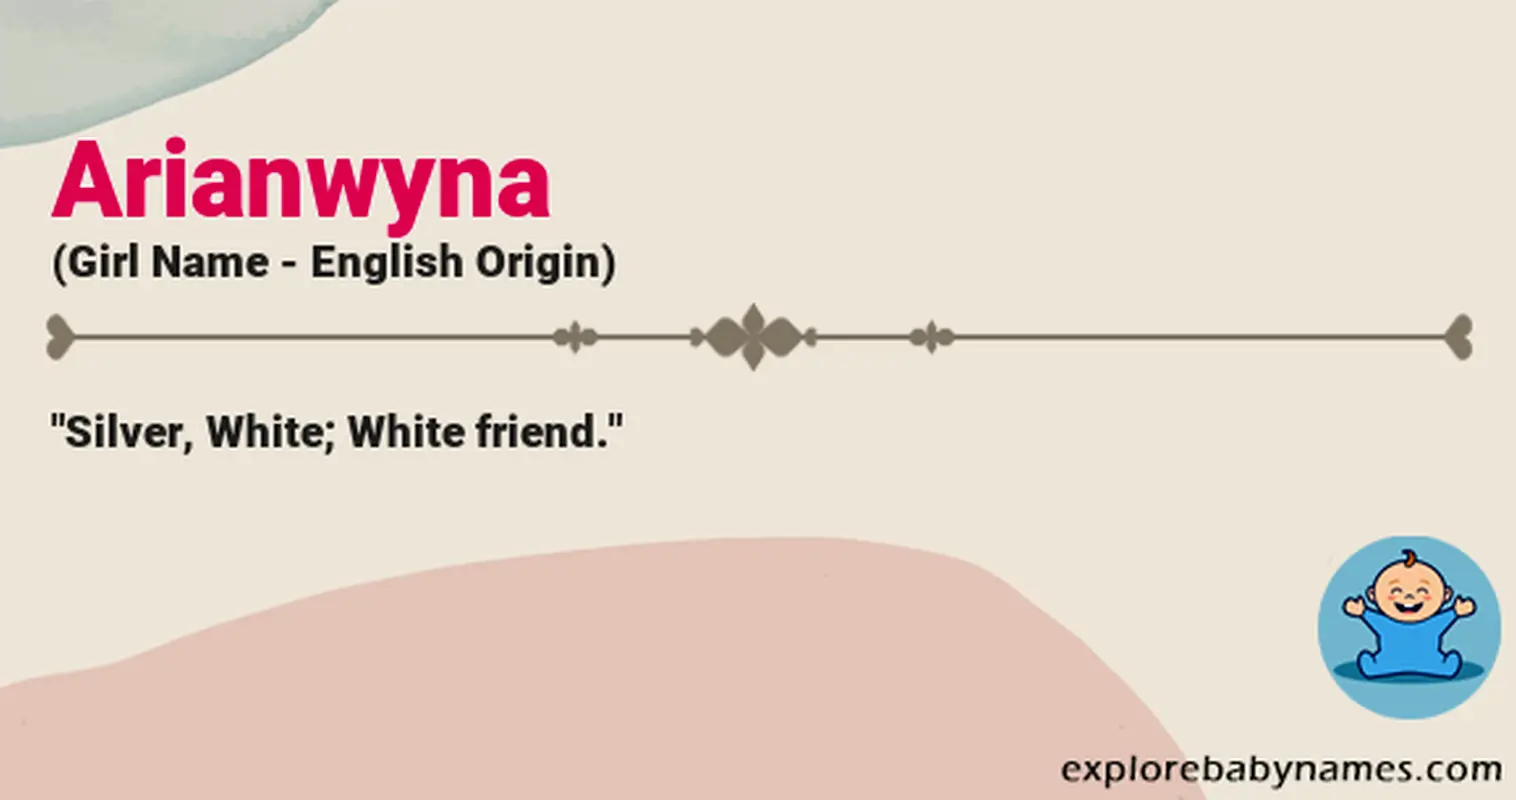 Meaning of Arianwyna